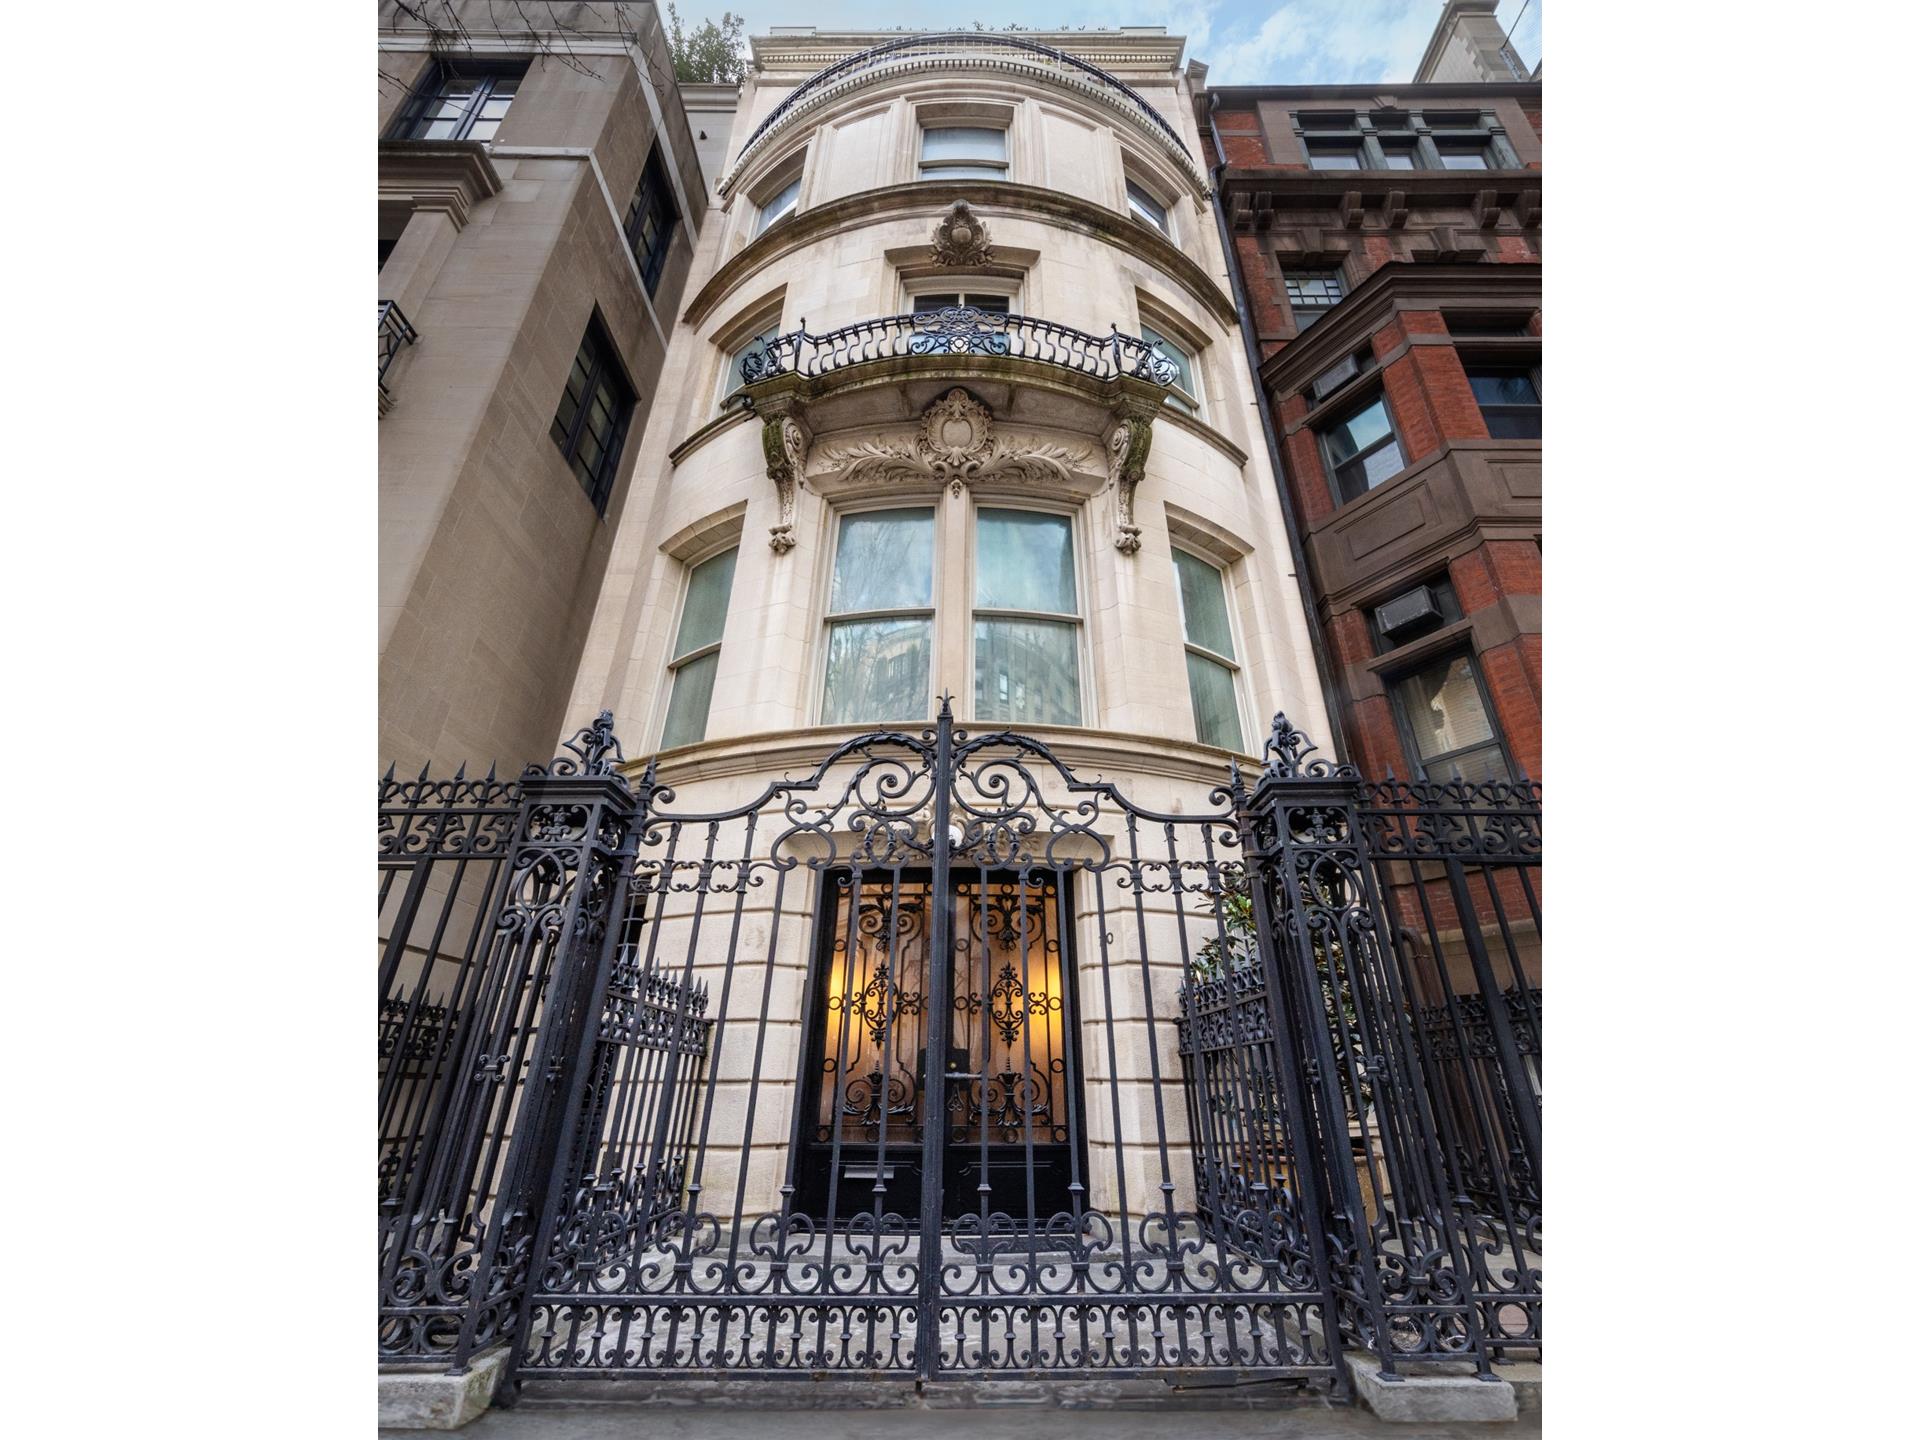 10 East 67th Street, Lenox Hill, Upper East Side, NYC - 8 Bedrooms  
8.5 Bathrooms  
20 Rooms - 